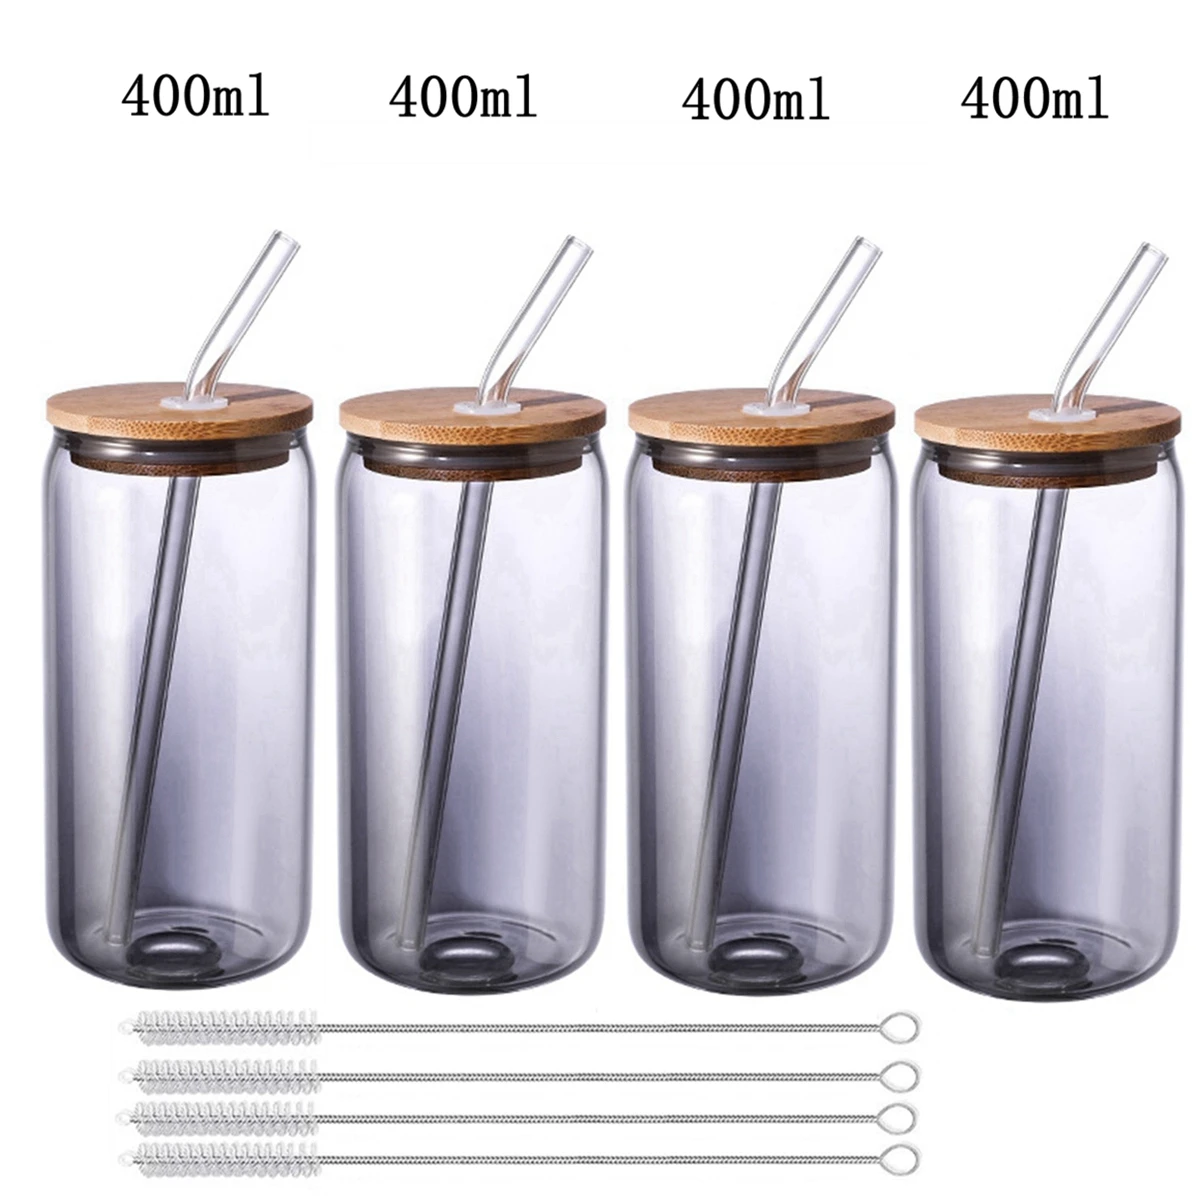 https://ae01.alicdn.com/kf/S863a3512b537449a8ce008f8ef228e0fO/4-Set-Coke-Cup-Glasses-with-Bamboo-Lids-and-Glass-Straw-Reusable-Drinking-Glasses-Beer-Can.jpg